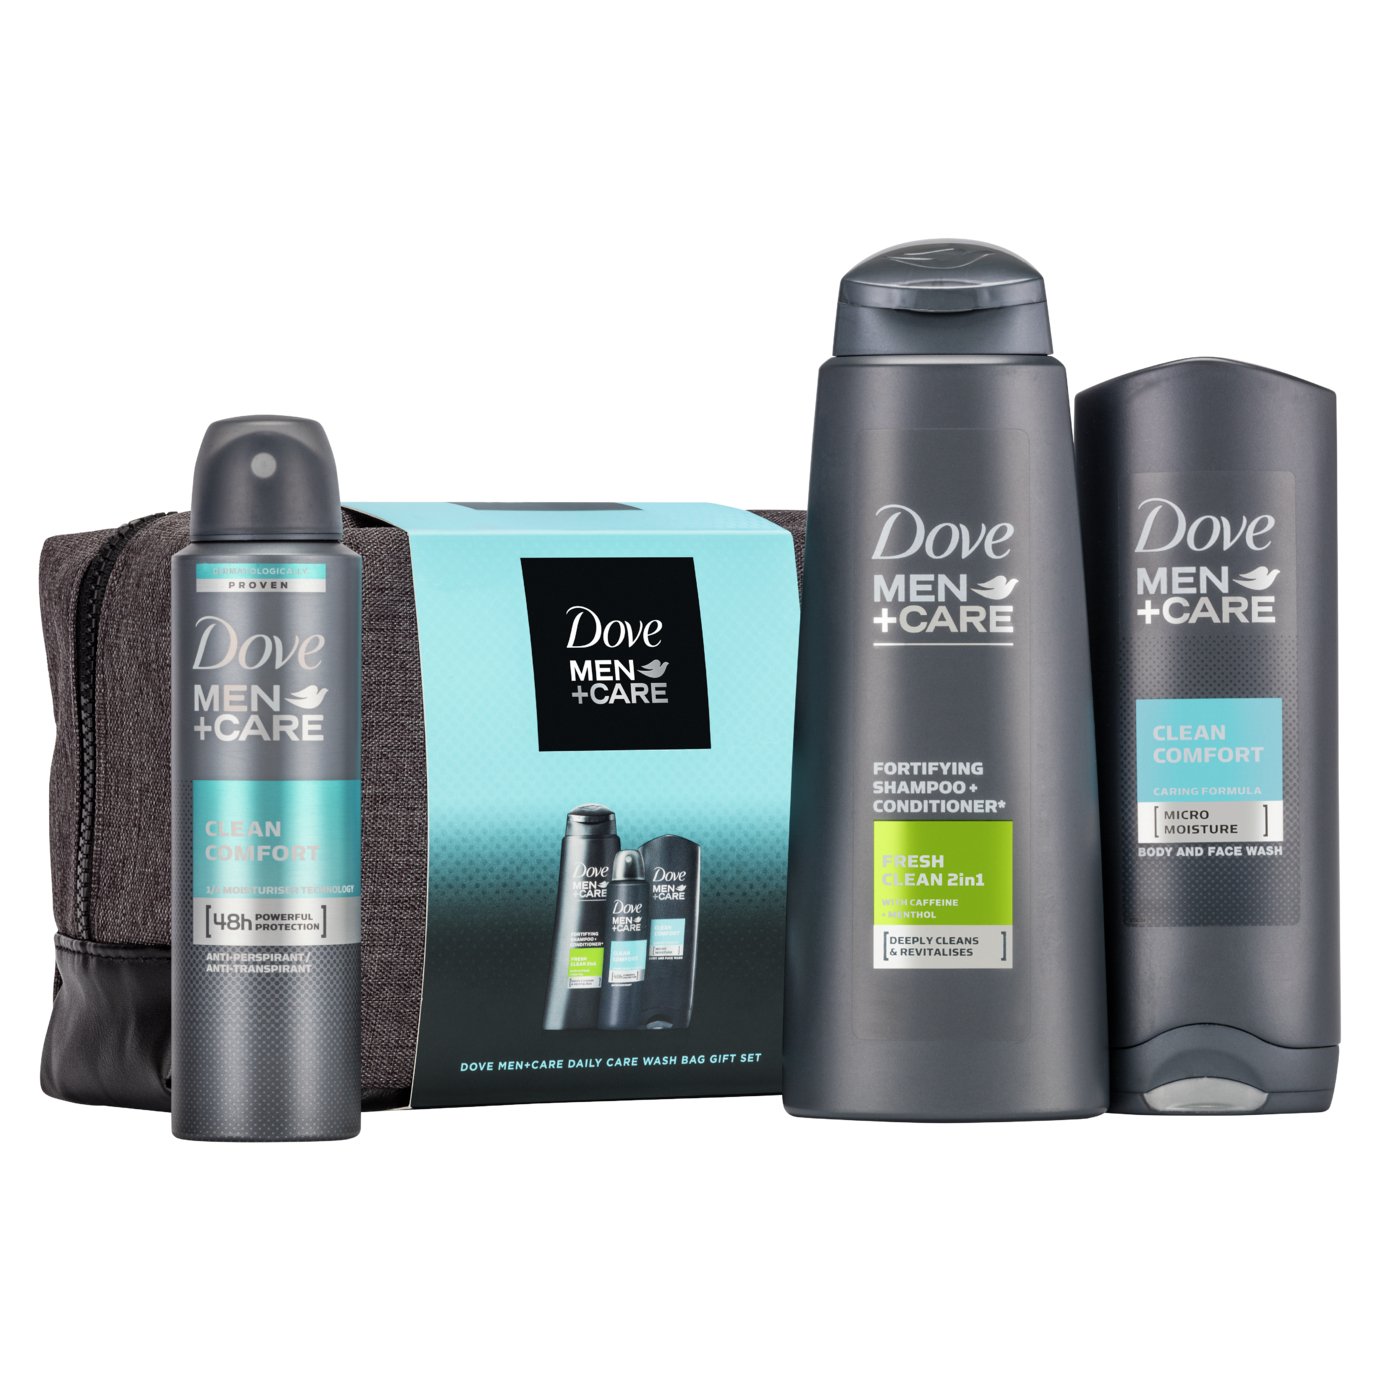 Dove Men and Care Daily wash Bag Gift Set